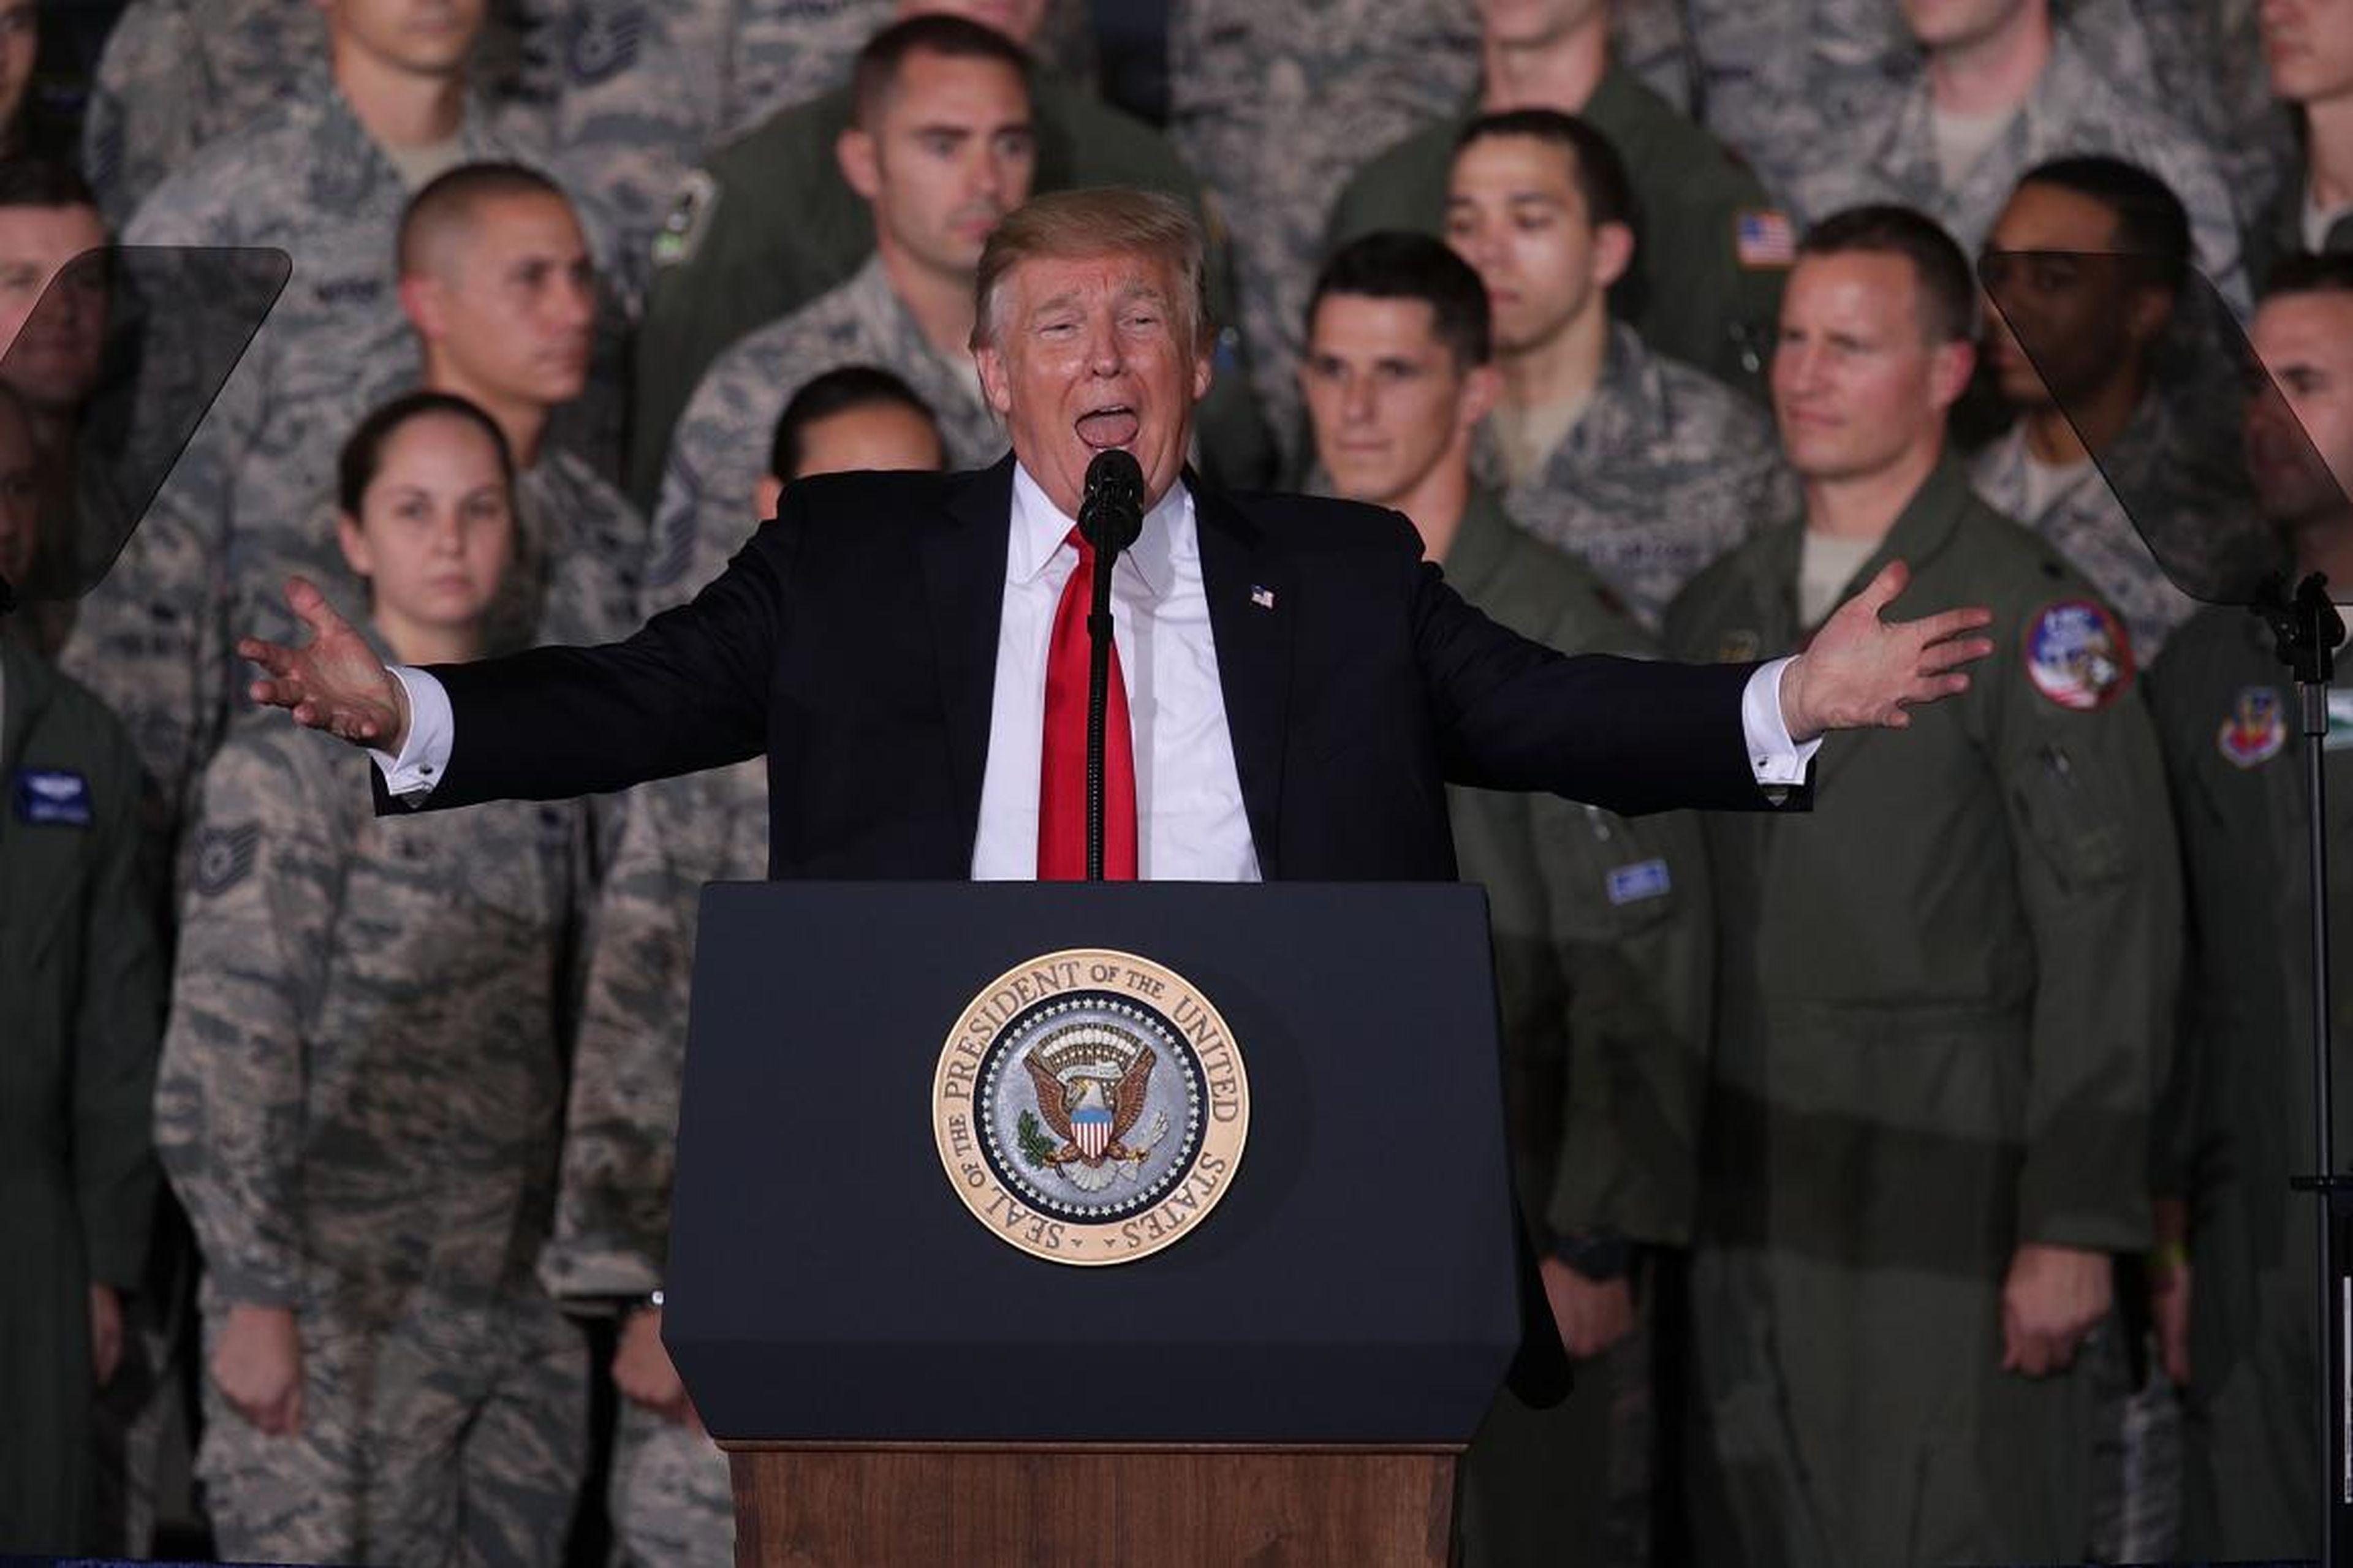 U.S. President Donald Trump speaks to Air Force personnel during an event September 15, 2017 at Joint Base Andrews in Maryland. President Trump attended the event to celebrate the 70th birthday of the U.S. Air Force.